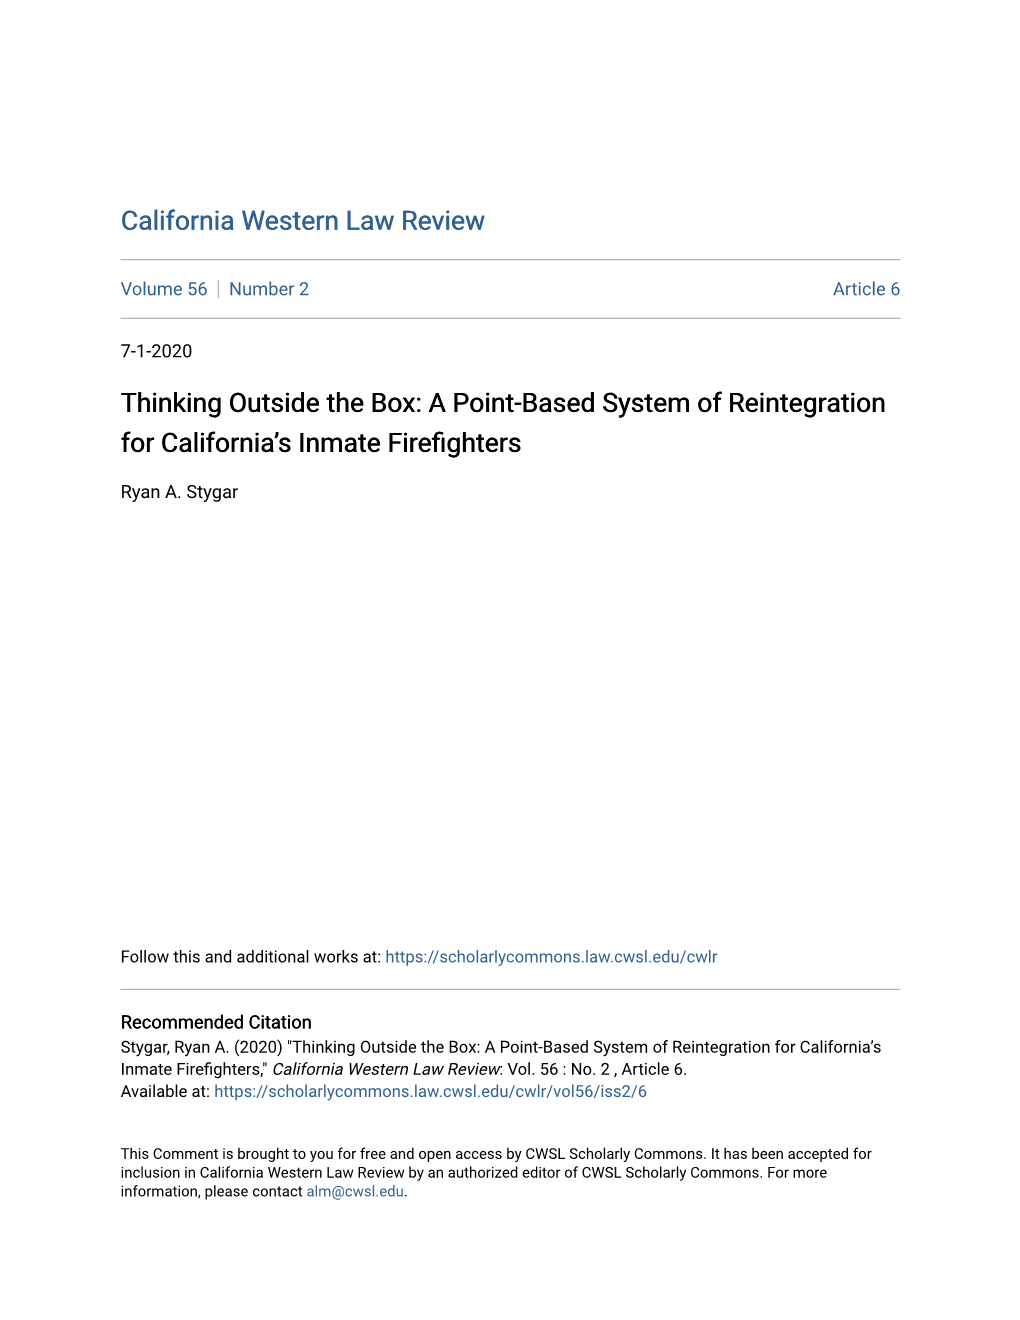 A Point-Based System of Reintegration for California's Inmate